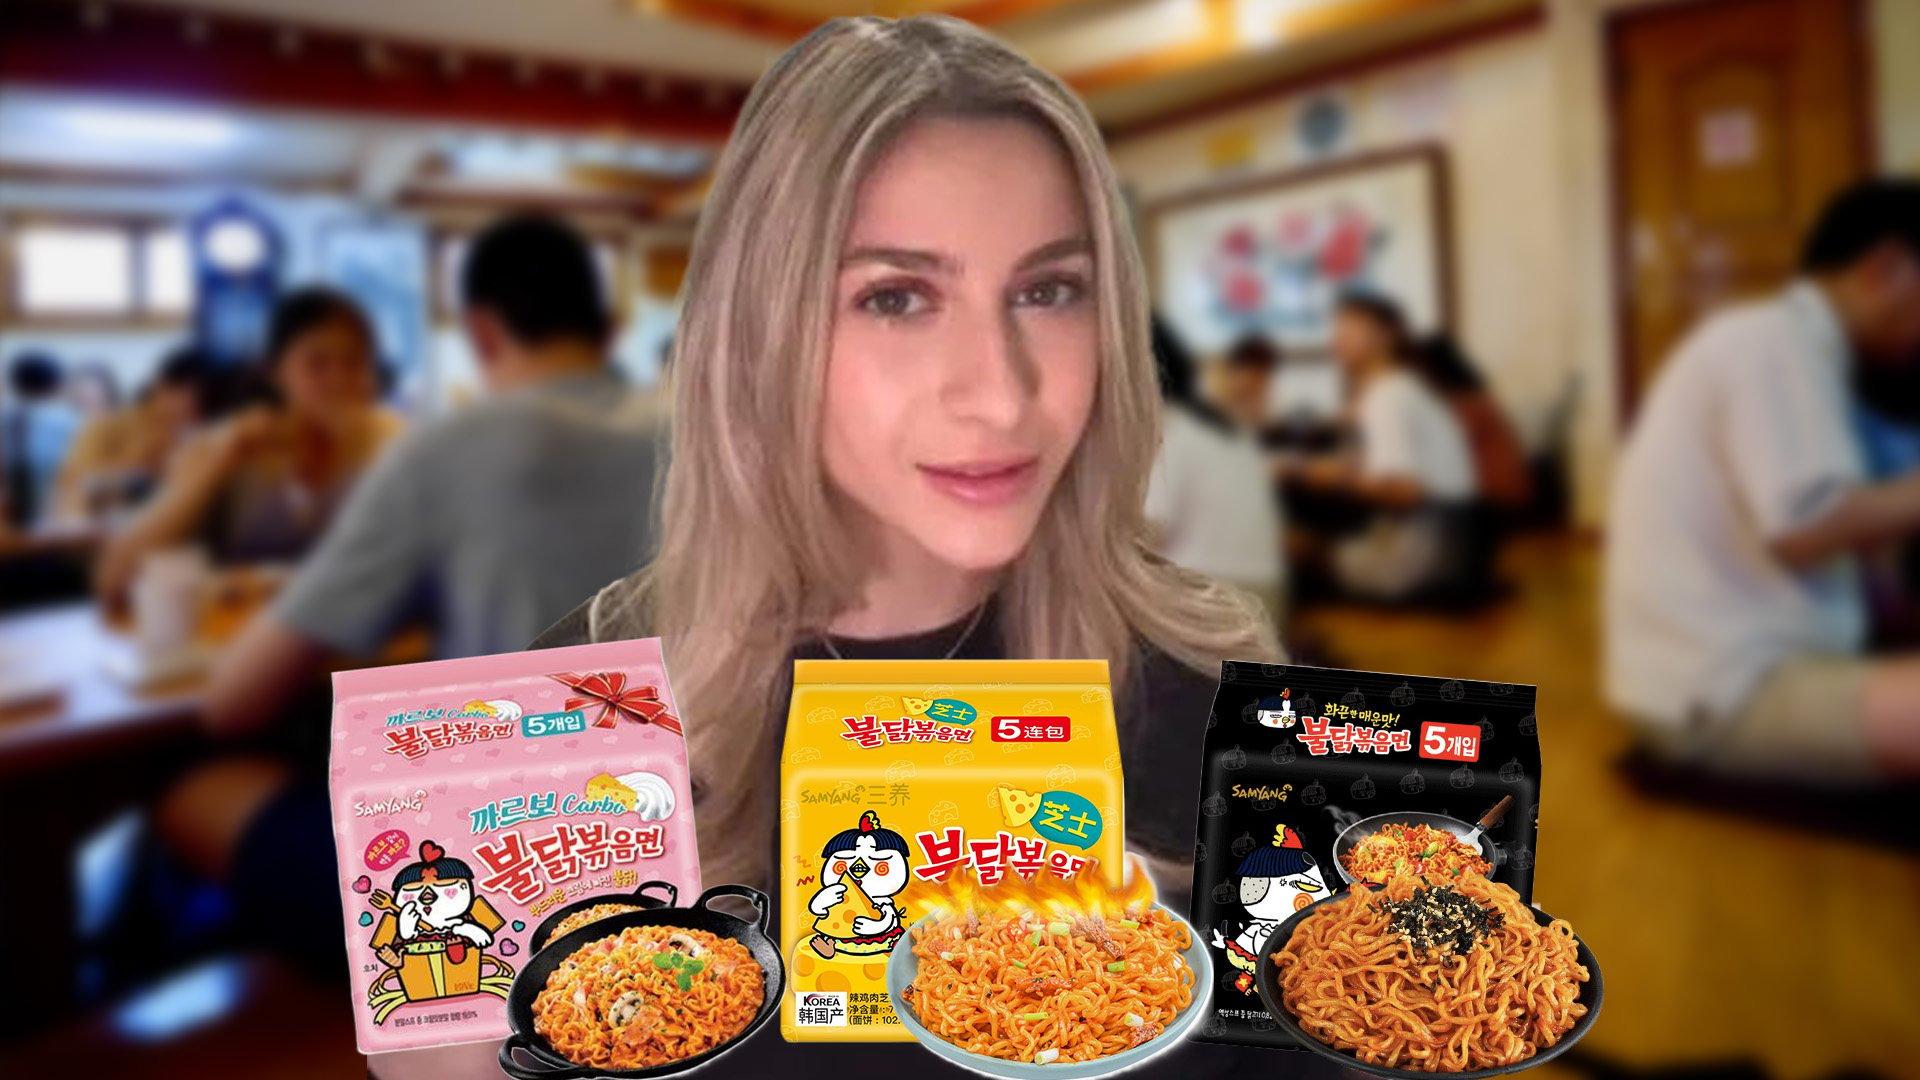 The hospitalisation of a US-based influencer after eating Korean Buldak fire noodles has thrust the product into the international spotlight. The Post explains what all the fuss is about. Photo: SCMP composite/Shutterstock/Taobao/Weibo